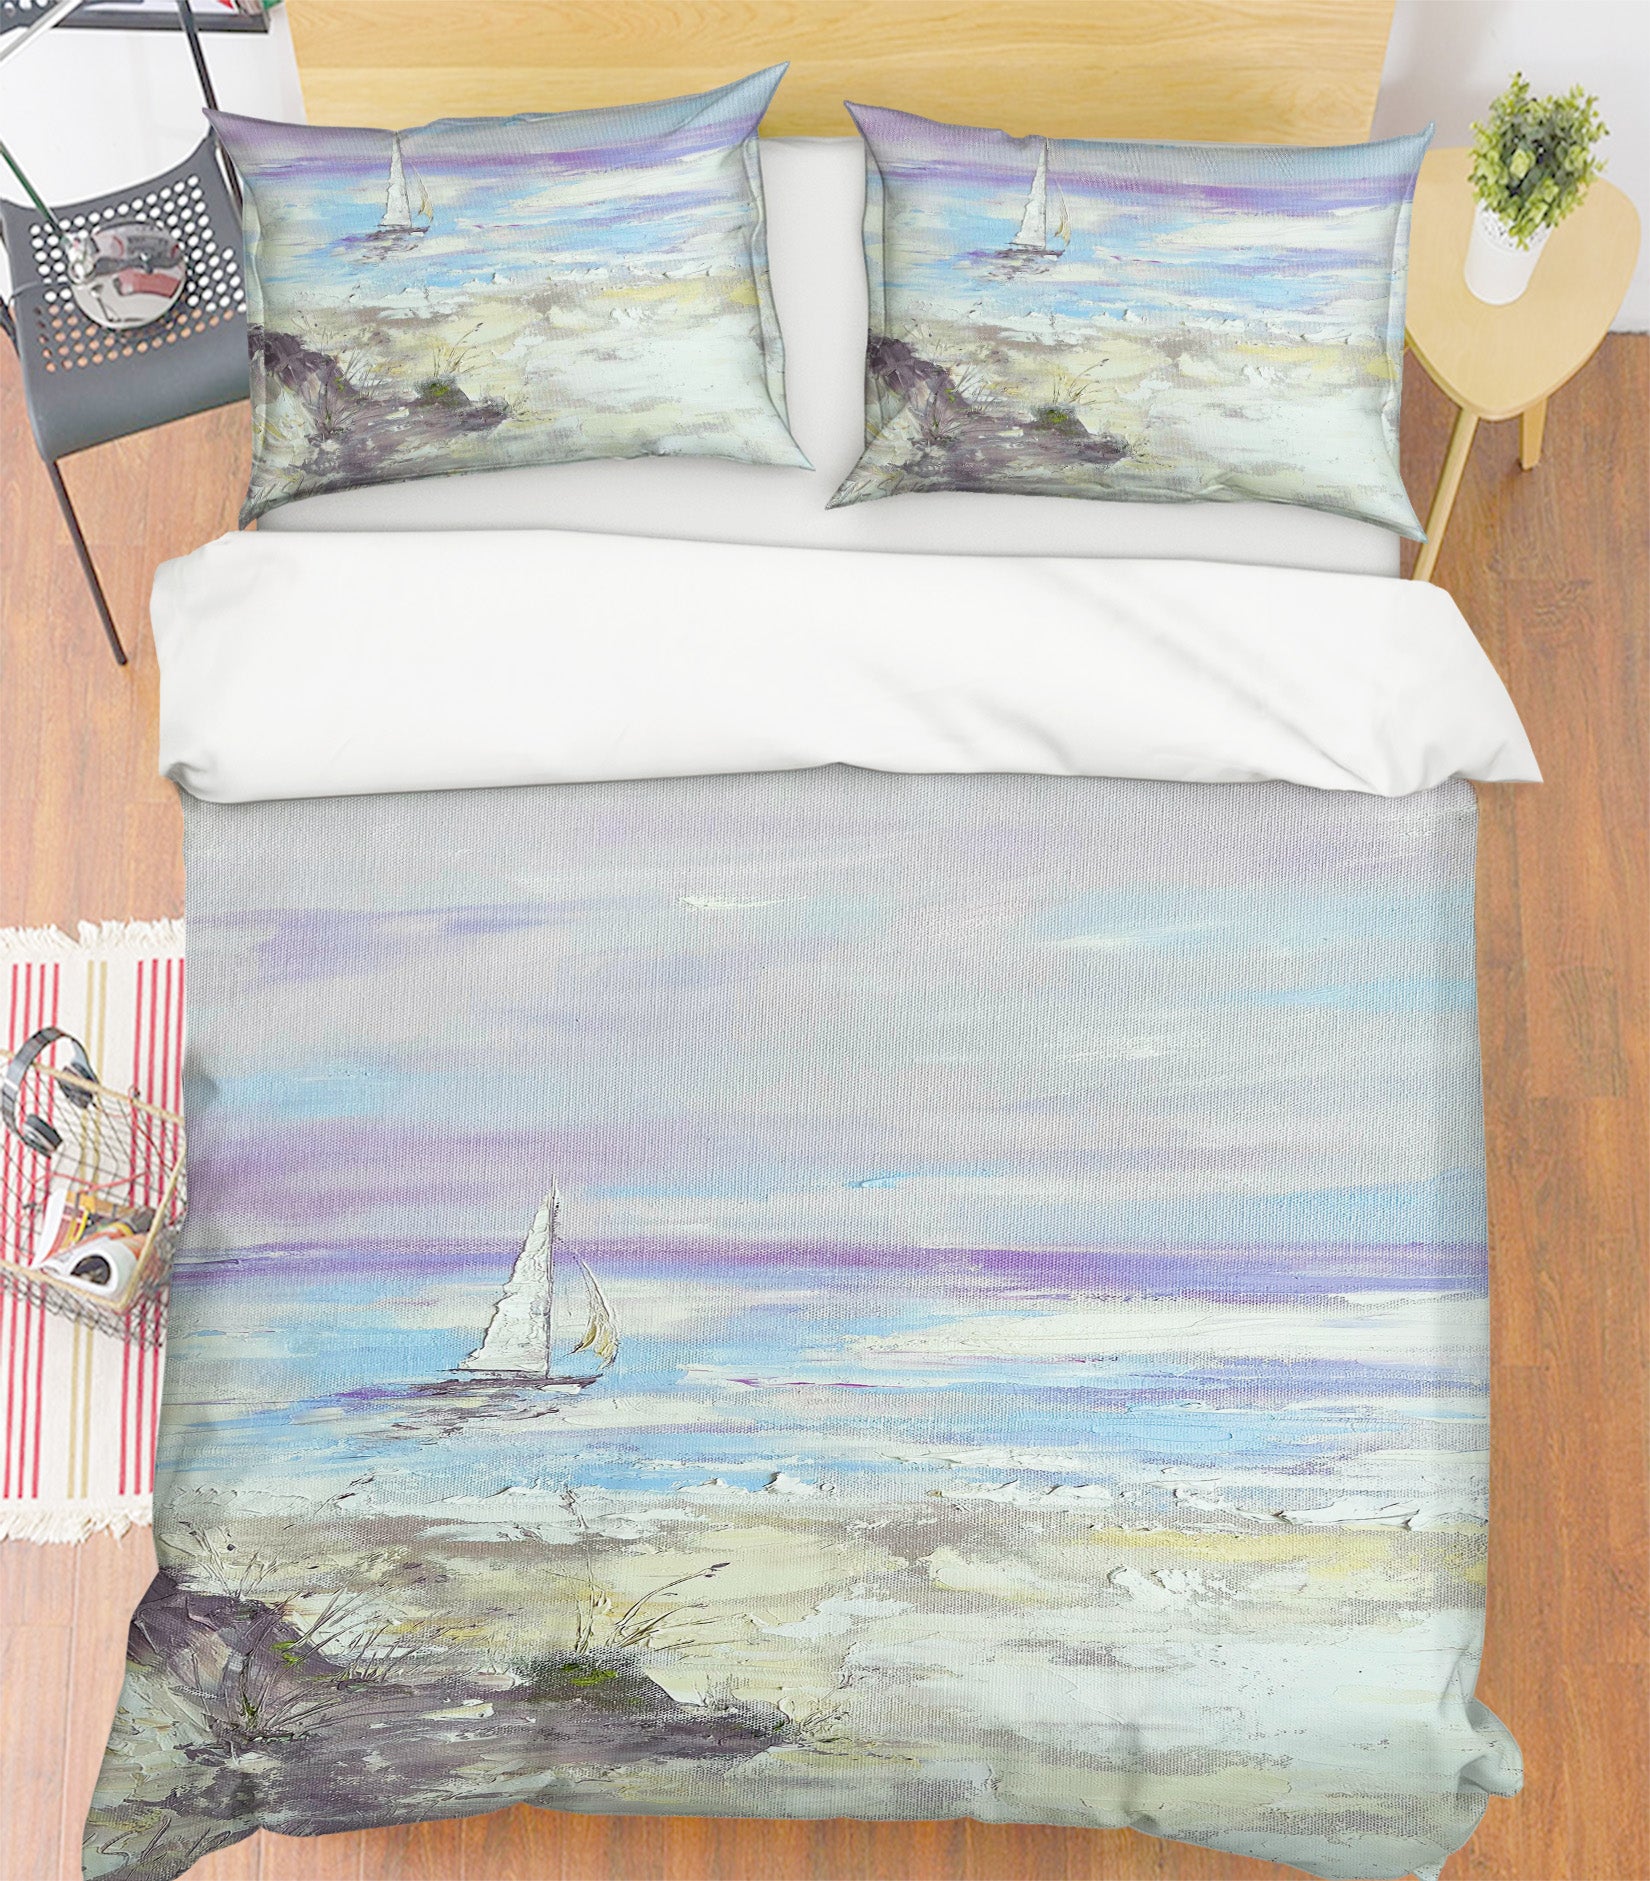 3D Colorful Sea 3793 Skromova Marina Bedding Bed Pillowcases Quilt Cover Duvet Cover